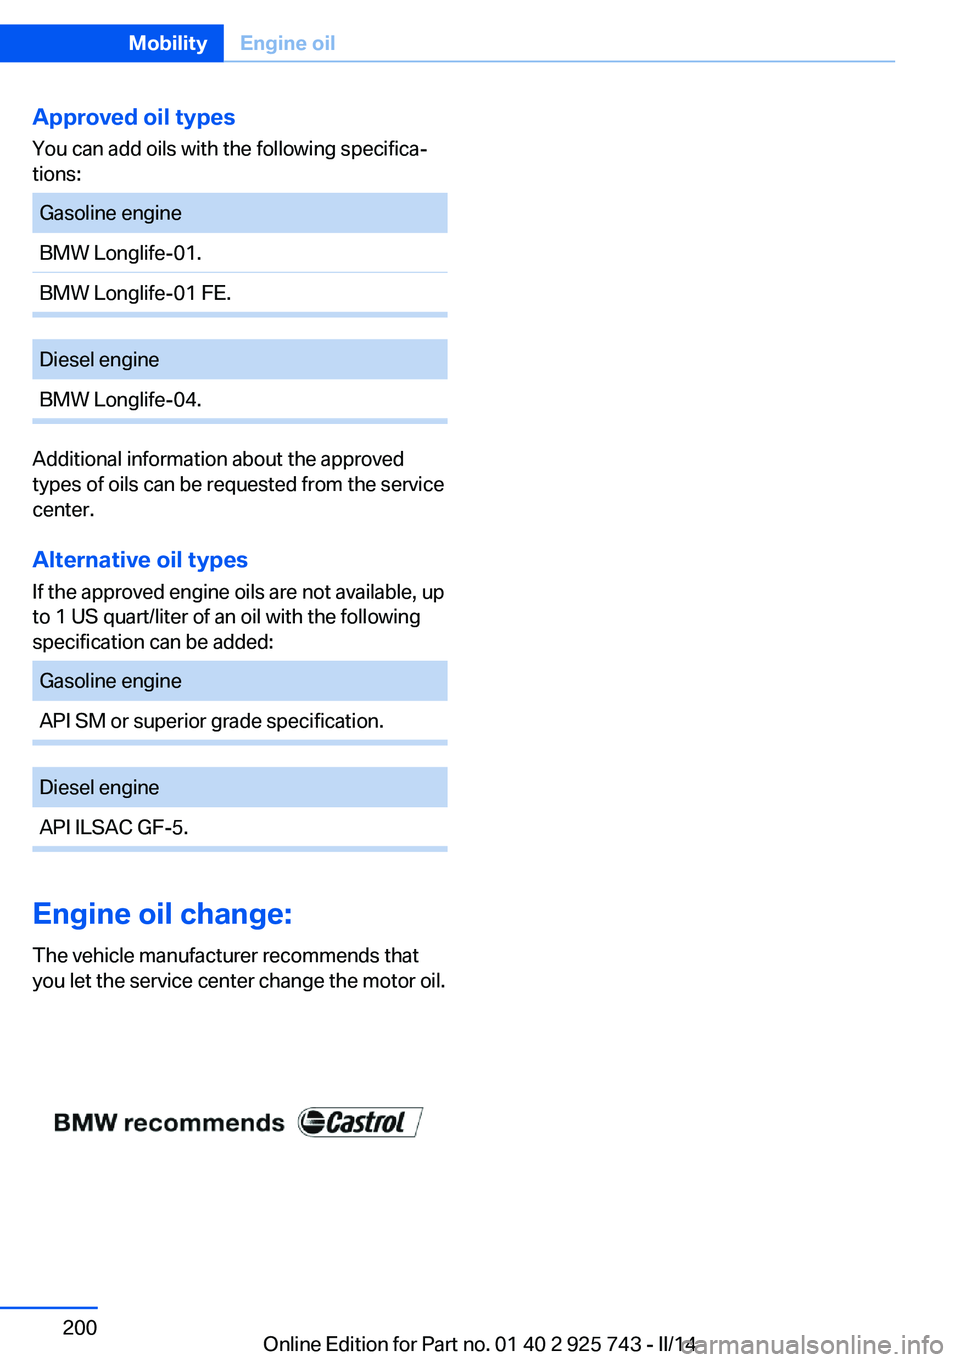 BMW 328D 2014  Owners Manual Approved oil typesYou can add oils with the following specifica‐
tions:Gasoline engineBMW Longlife-01.BMW Longlife-01 FE.Diesel engineBMW Longlife-04.
Additional information about the approved
types